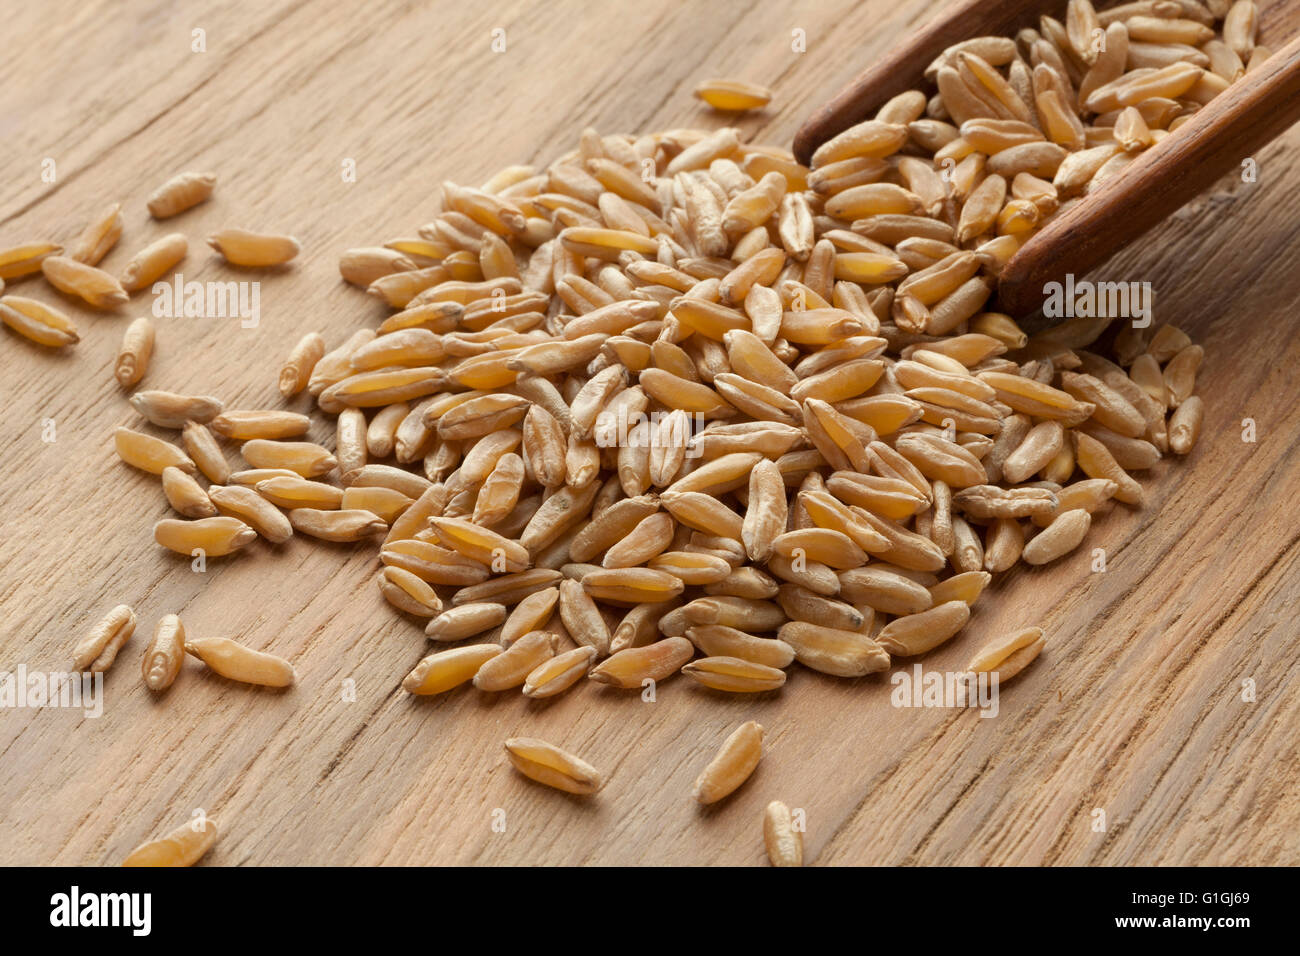 Wooden spoon with kamut kernels on the table Stock Photo